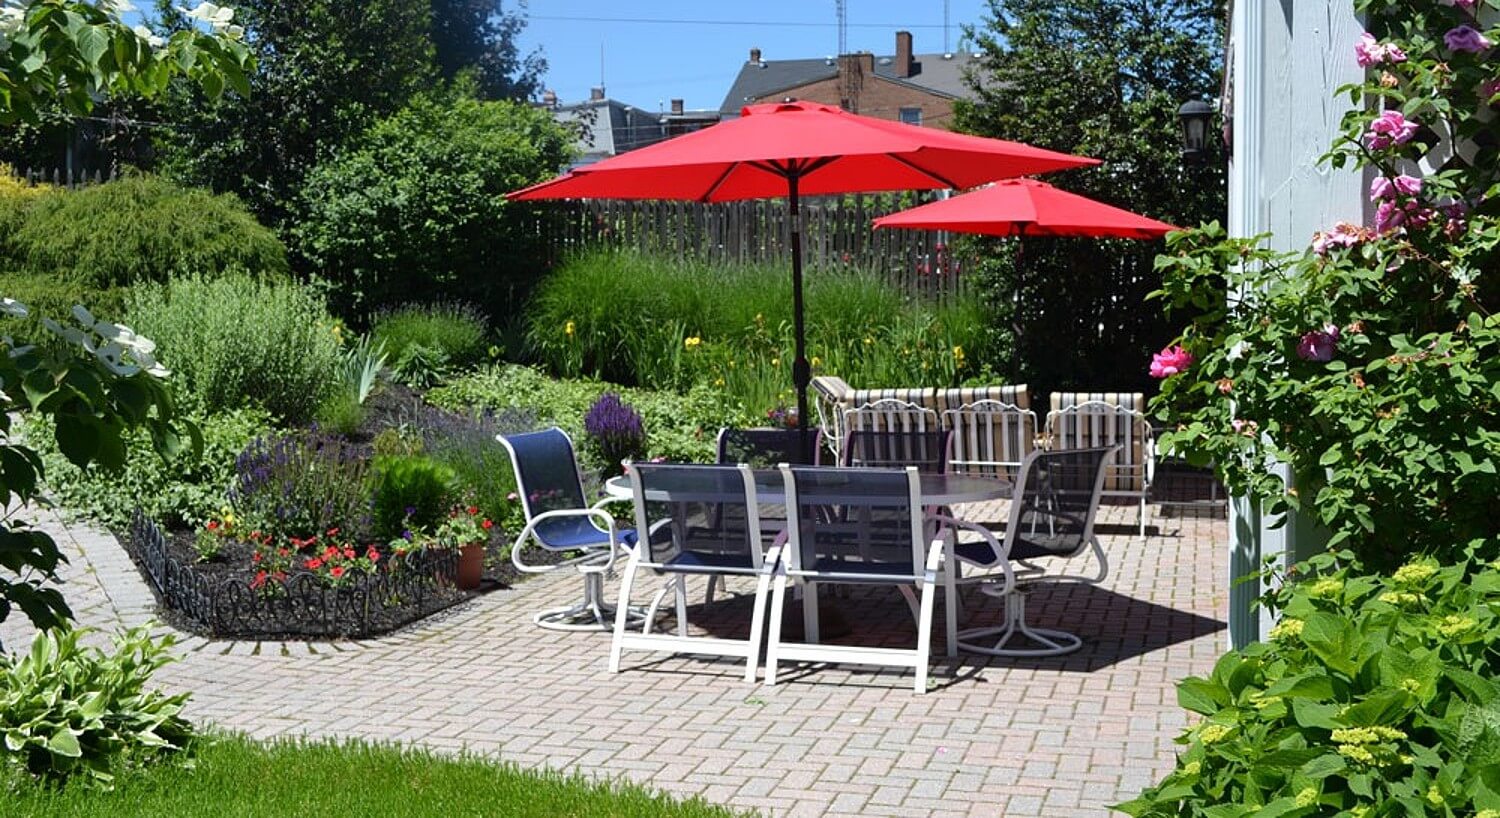 Backyard brick patio with lush landscaping and two patio tables with chairs and red umbrellas